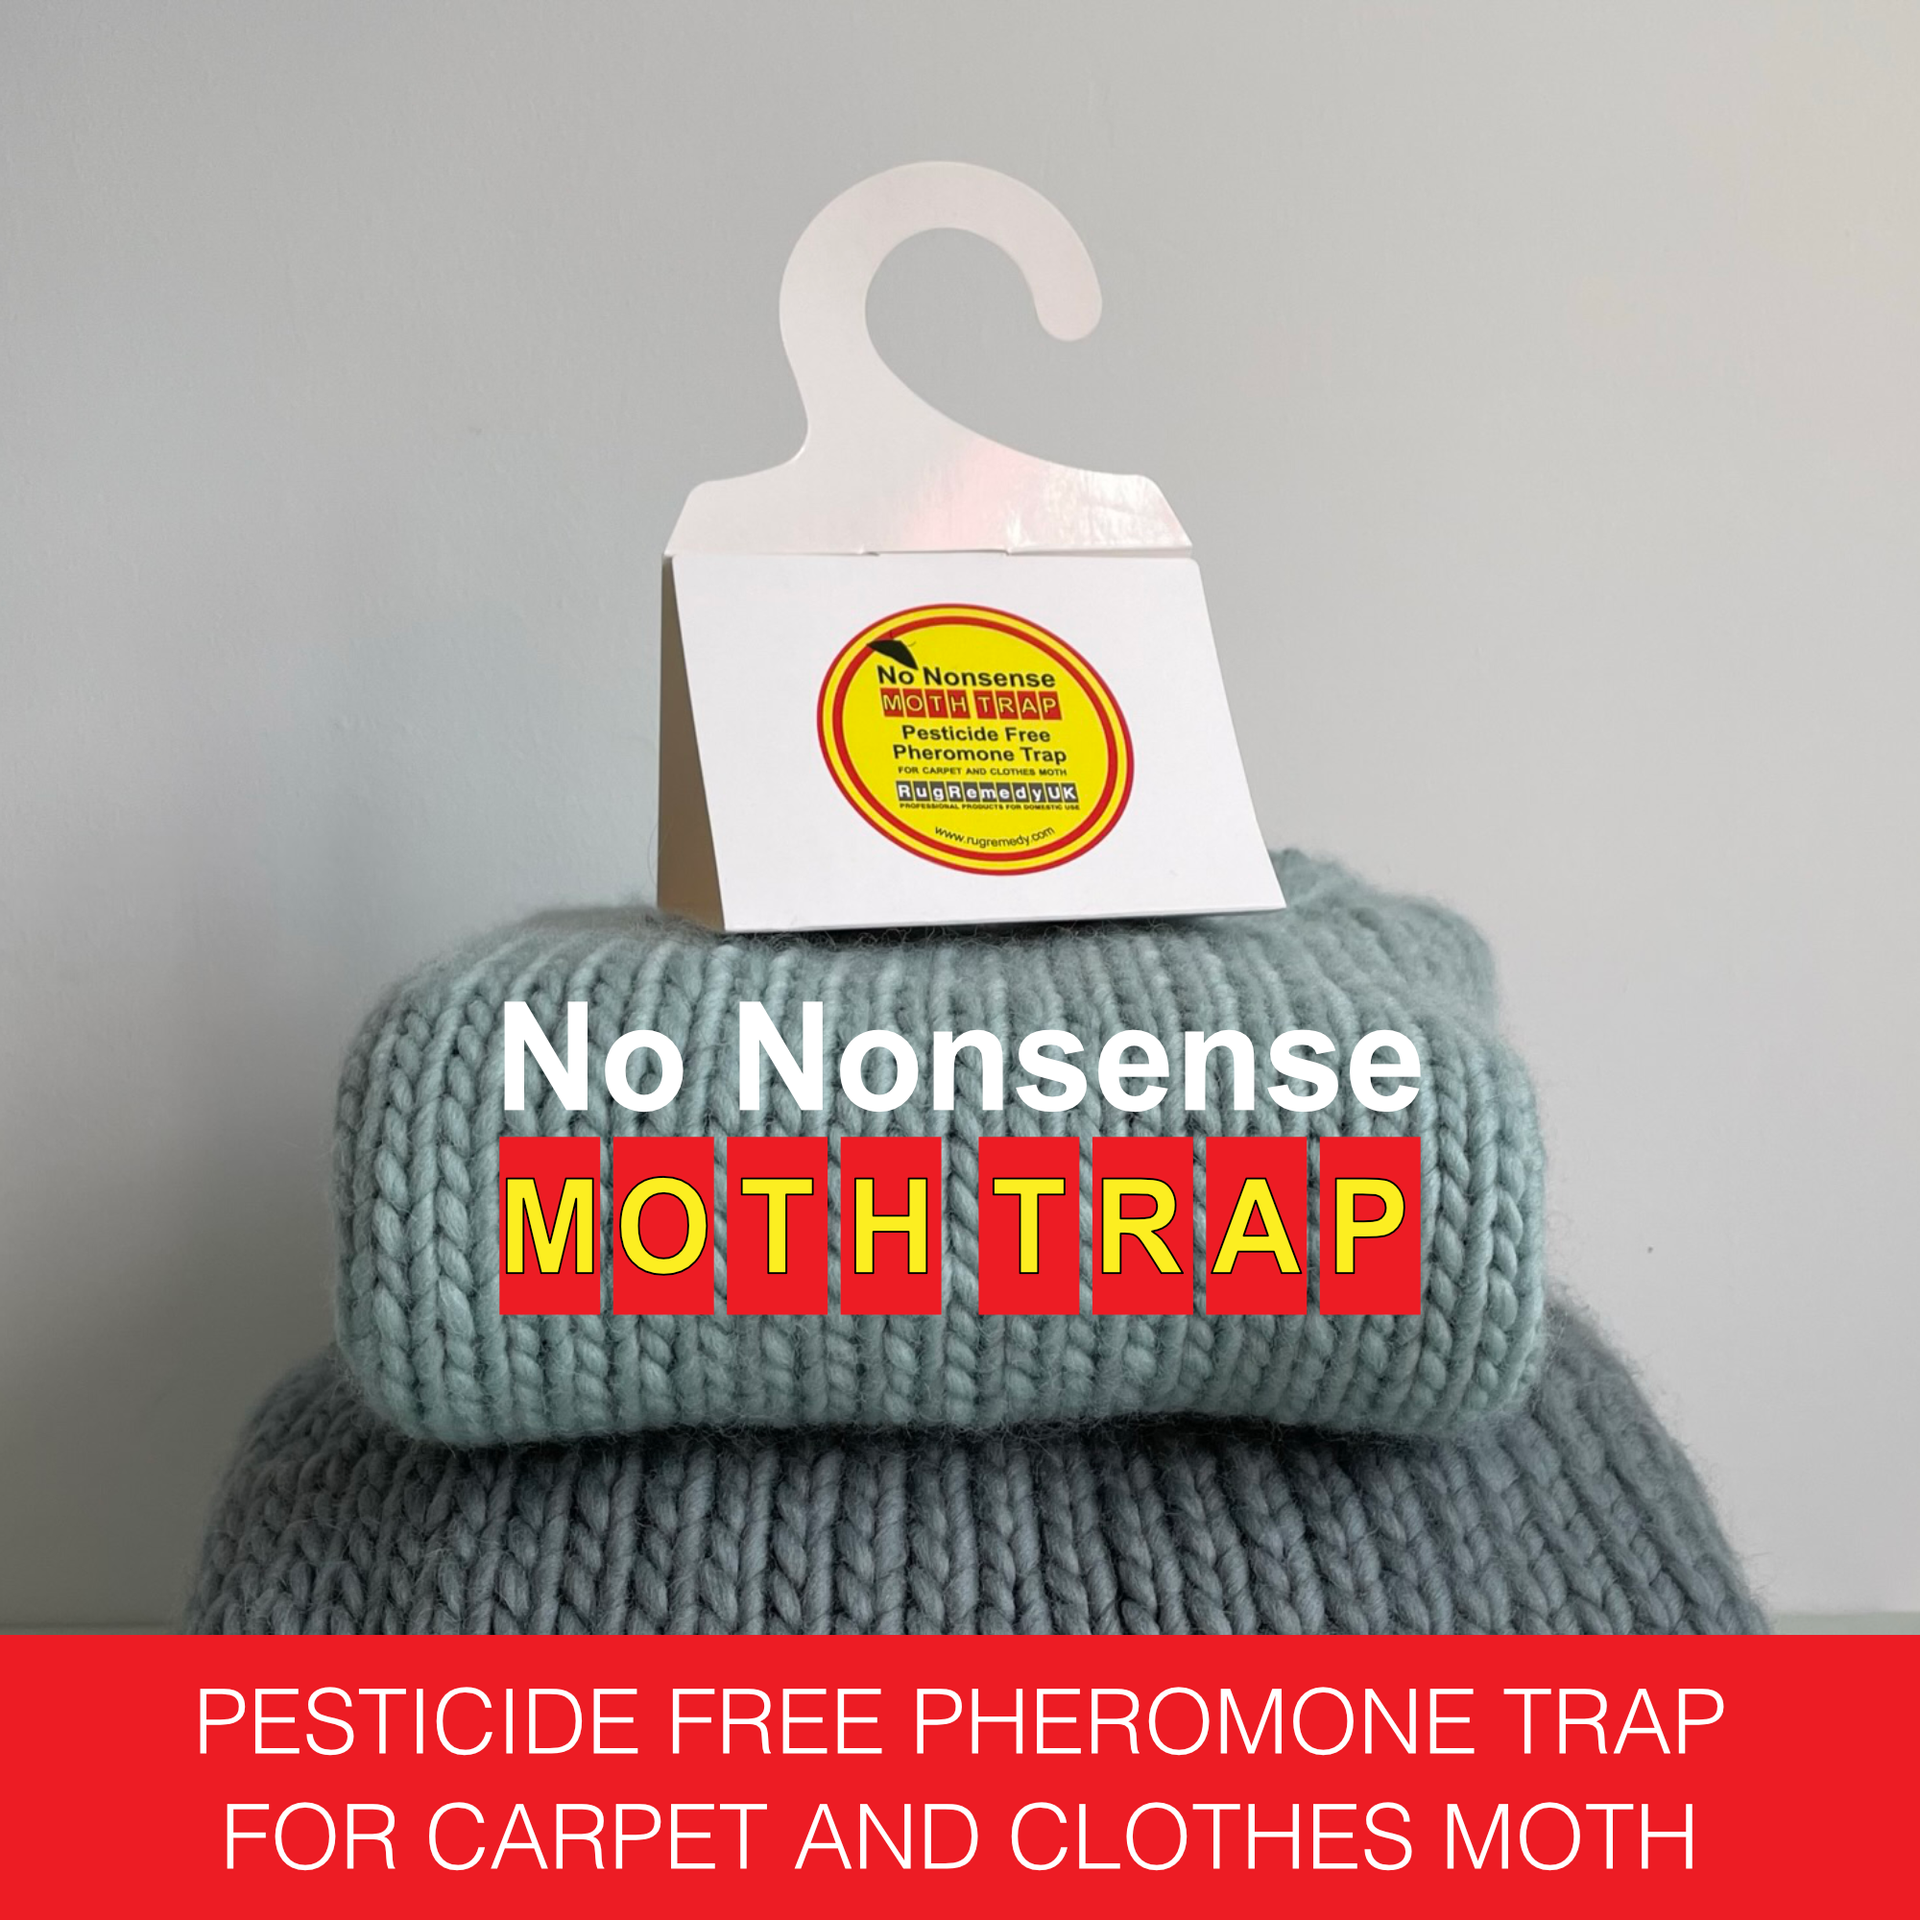 Pheromone Moth Trap - picture of woolly jumpers and the moth trap